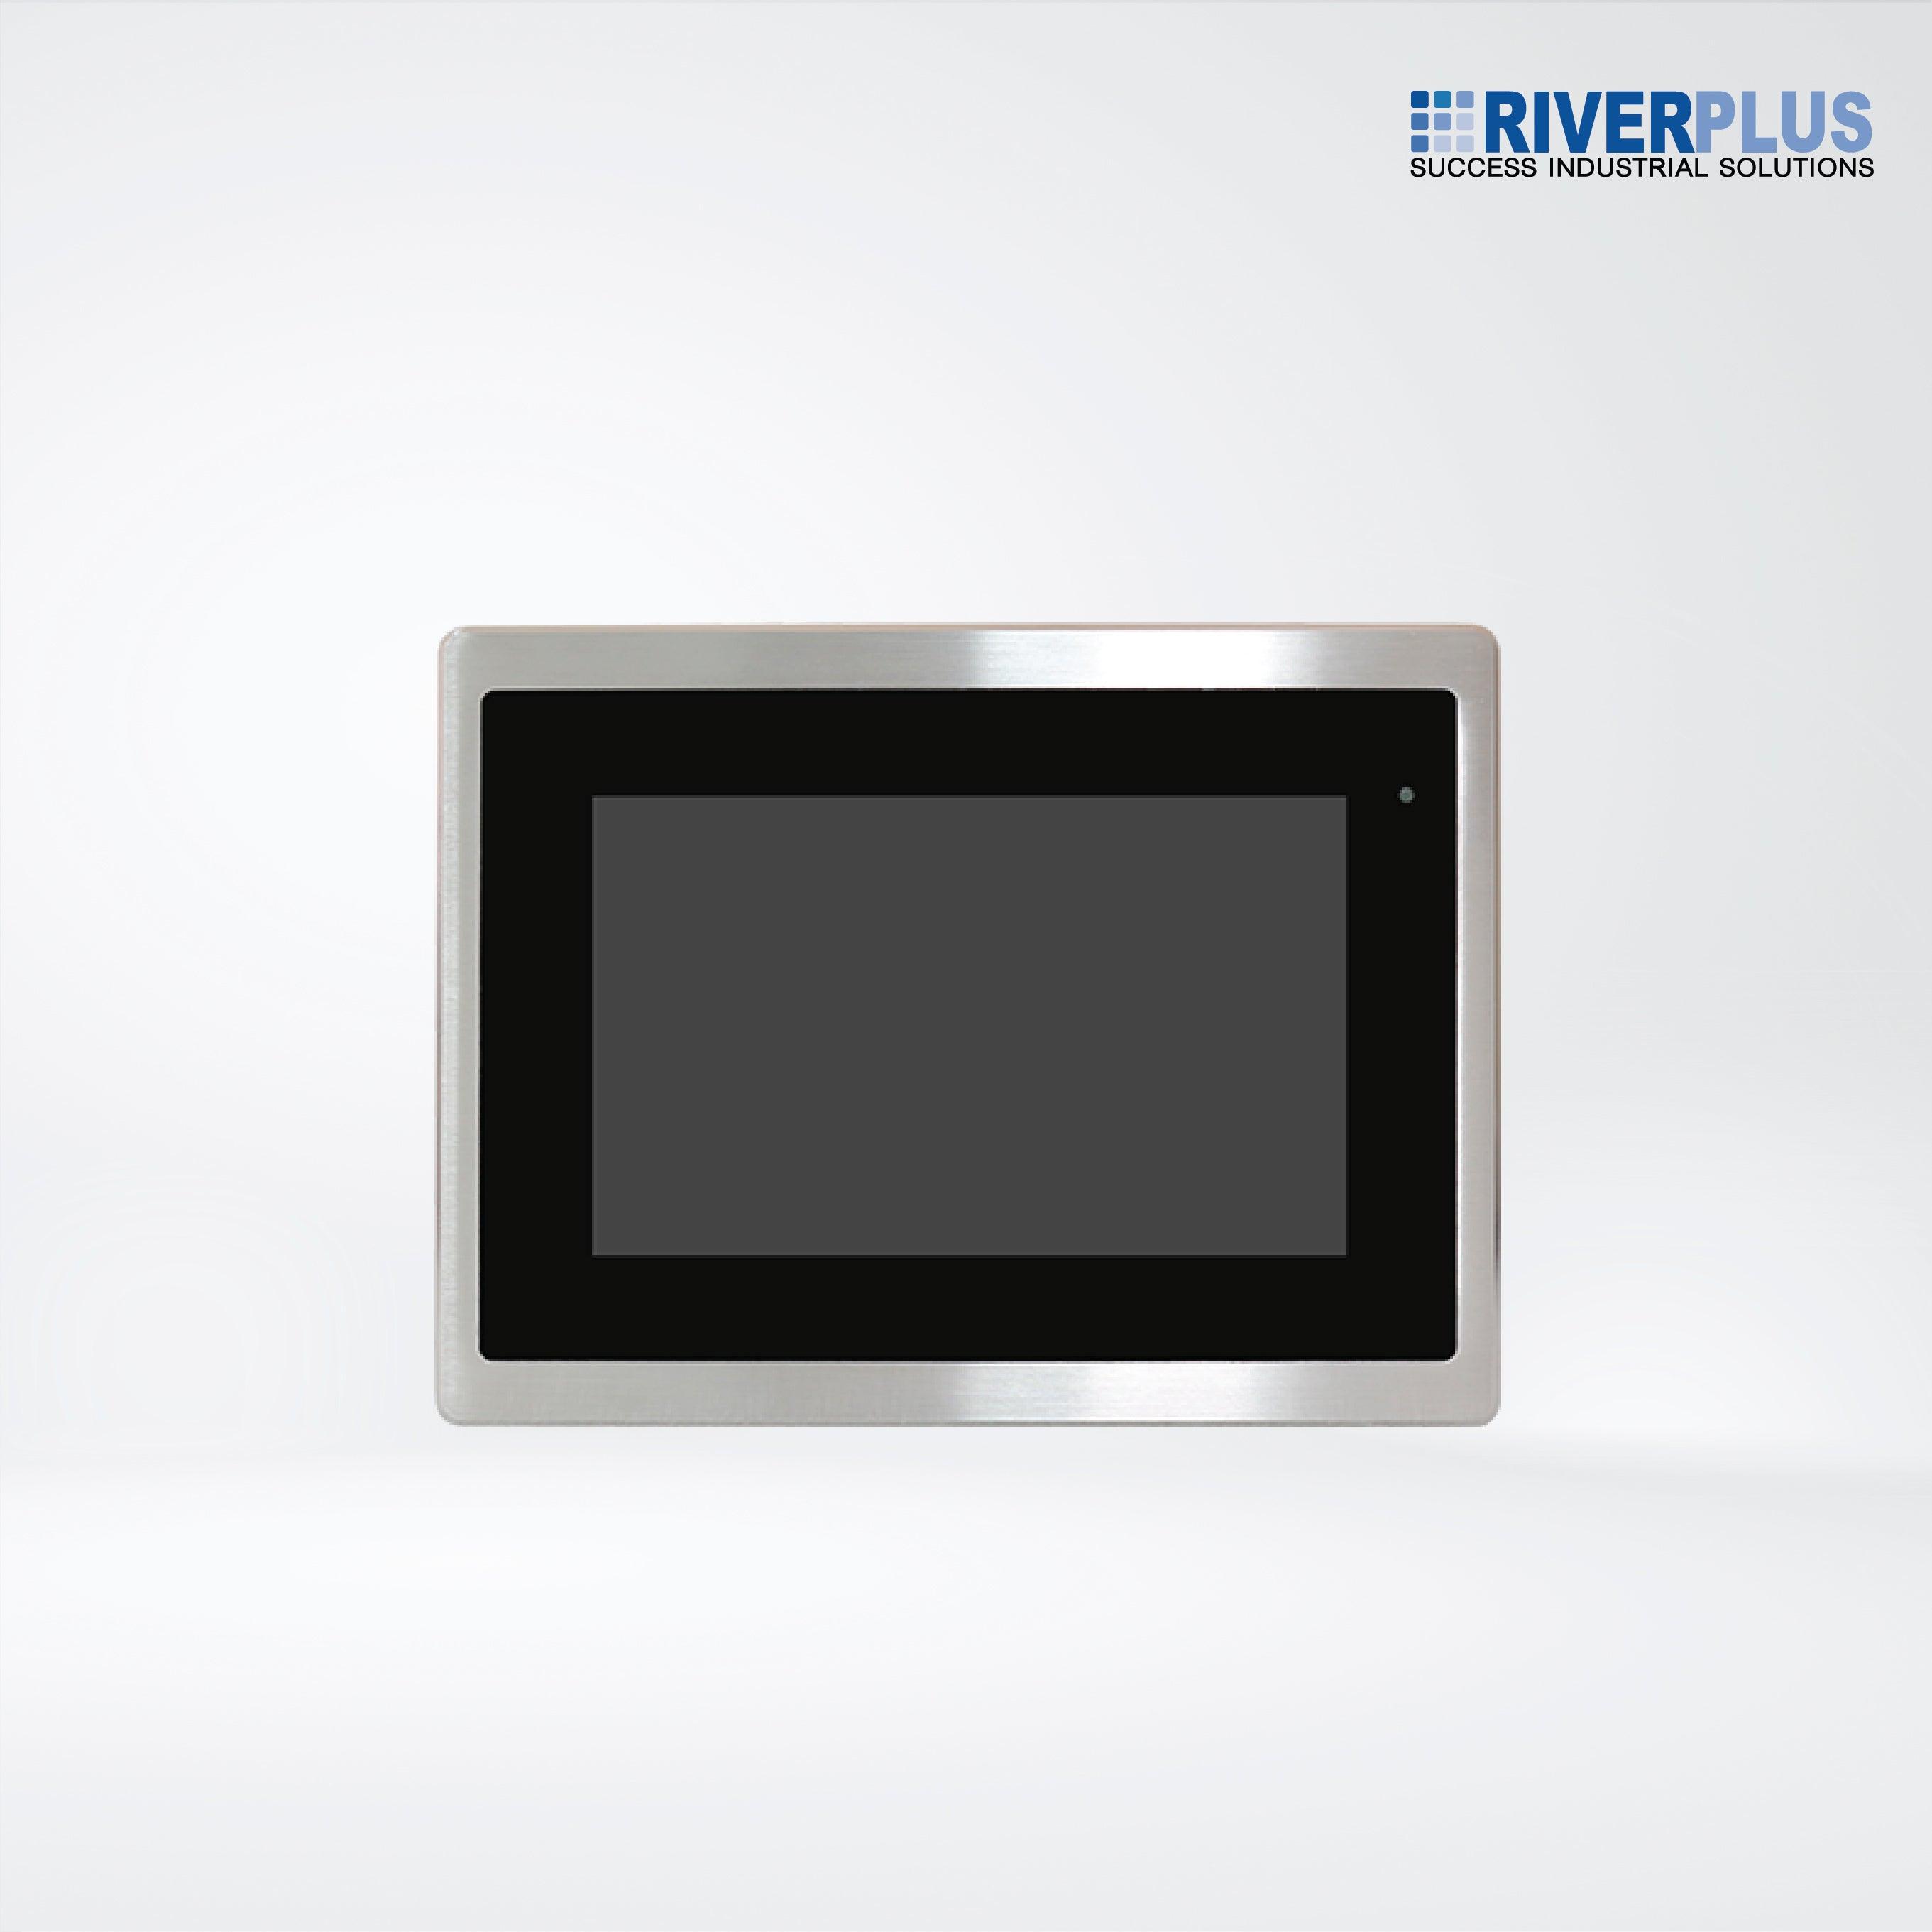 FABS-107GH 7” Flat Front Panel IP66 Stainless Chassis Display - Riverplus